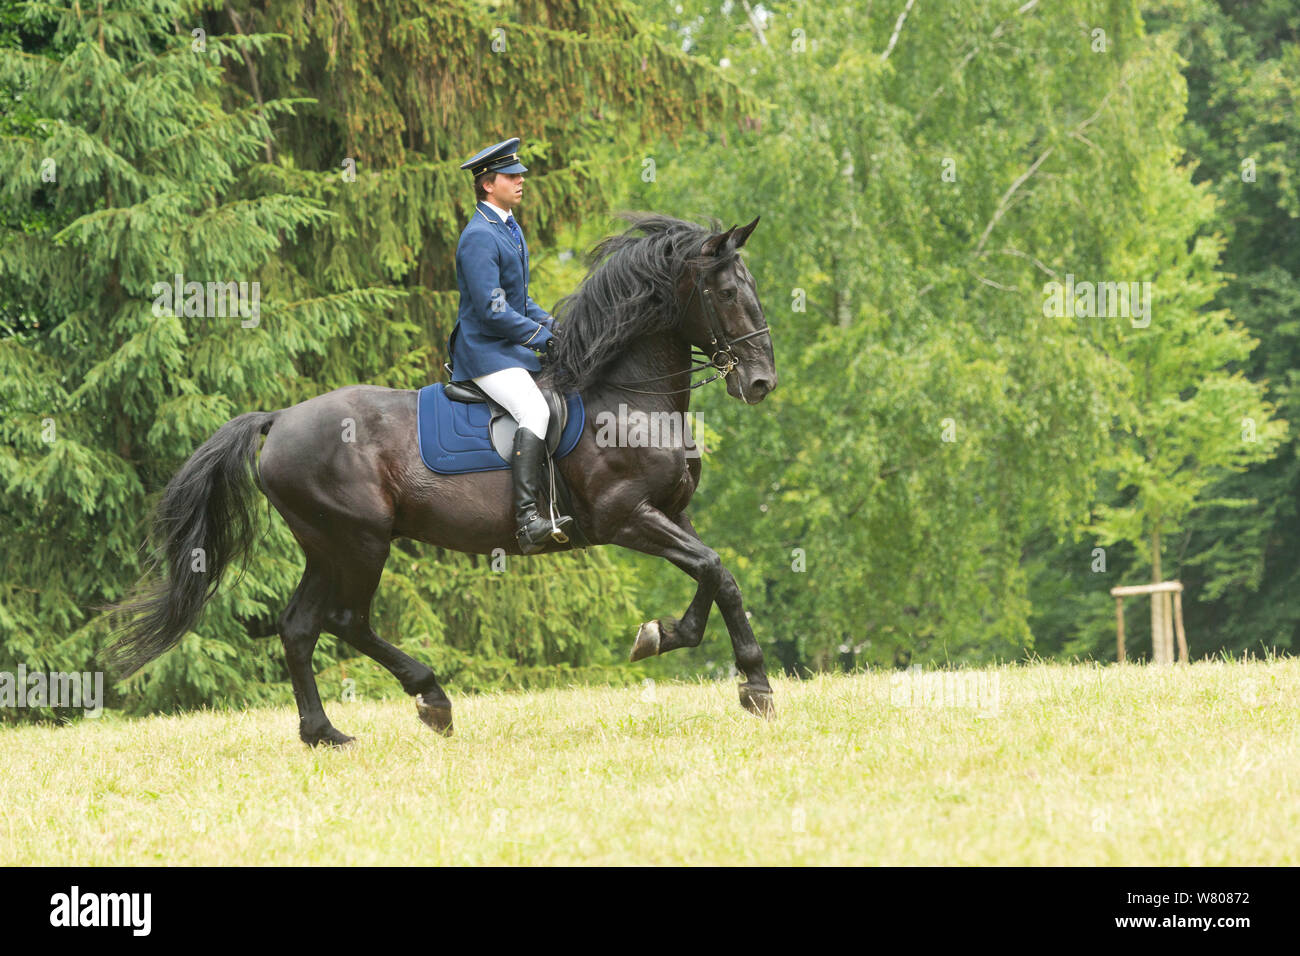 Man in traditional riding costume rides a rare black Kladruber horse/stallion, at the Great Riding festival, in Slatinany national stud, Pardubice Region, Czech Republic. June 2015. Stock Photo